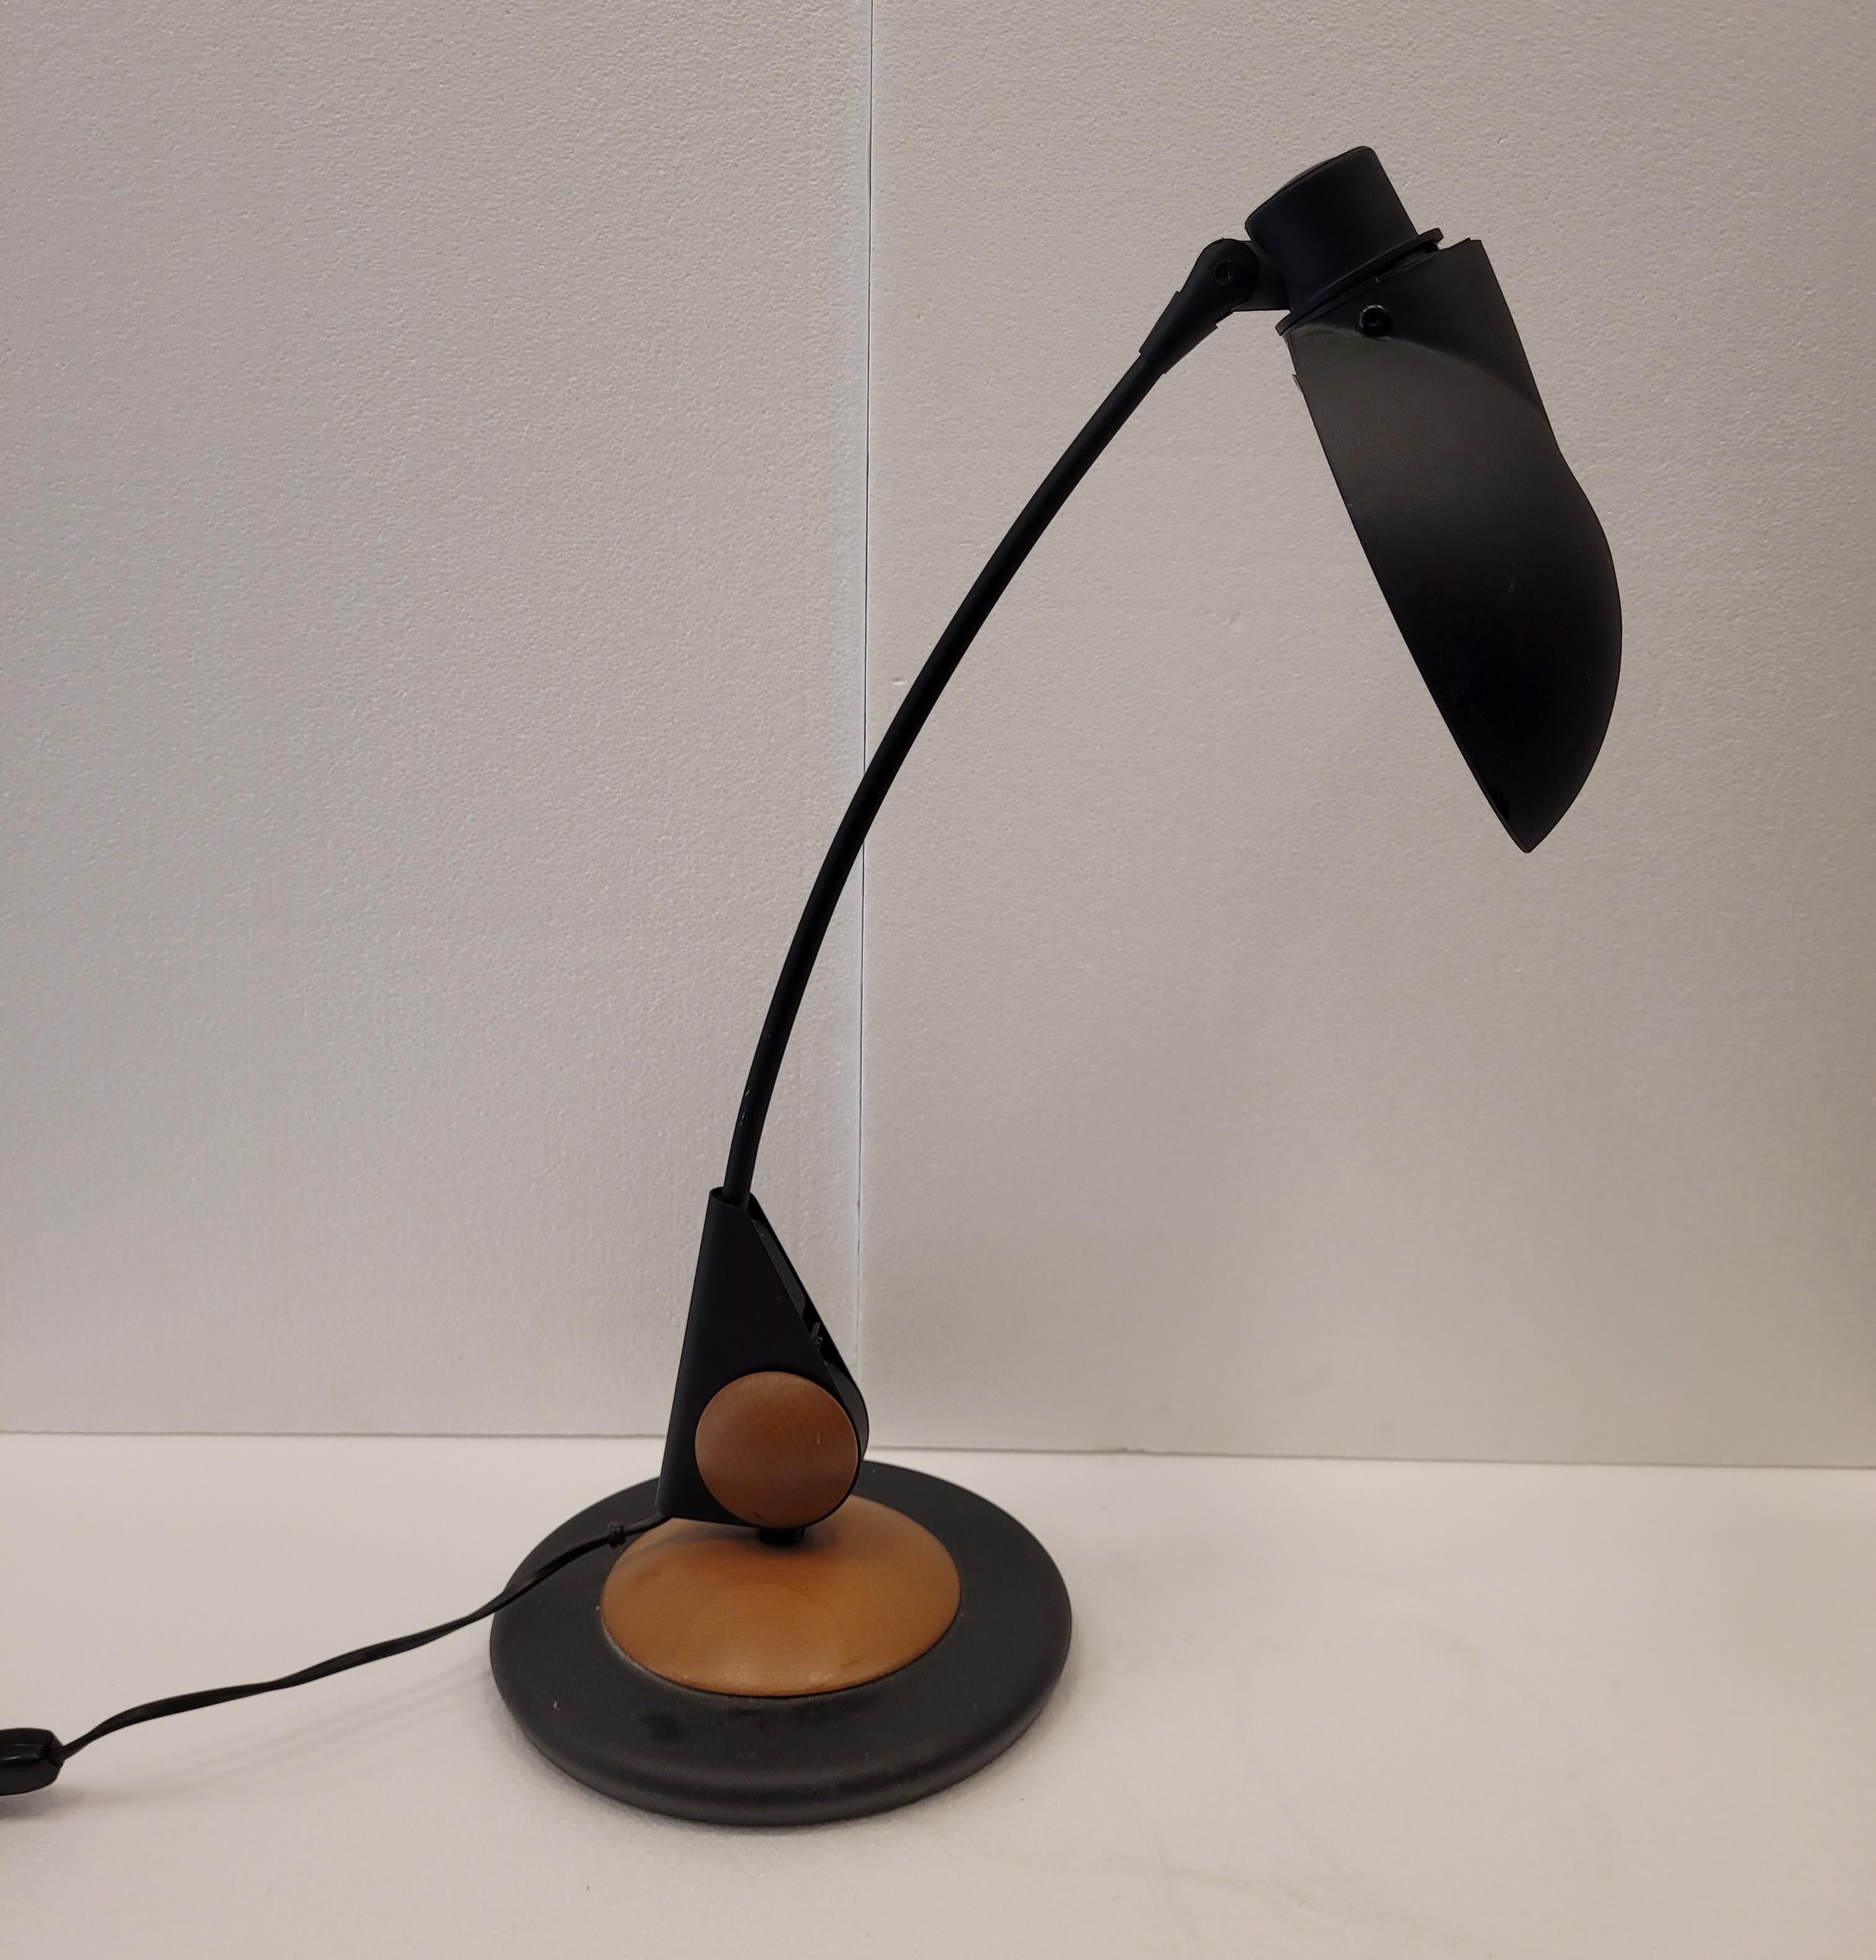 Beautiful and elegant table lamp in ebonized metal and natural wood base.
Arched shaft on a tondo base in natural wood and black metal.
Italy, midcentury, circa 1950. In operation.
Good condition for its use and age.
It comes from a French